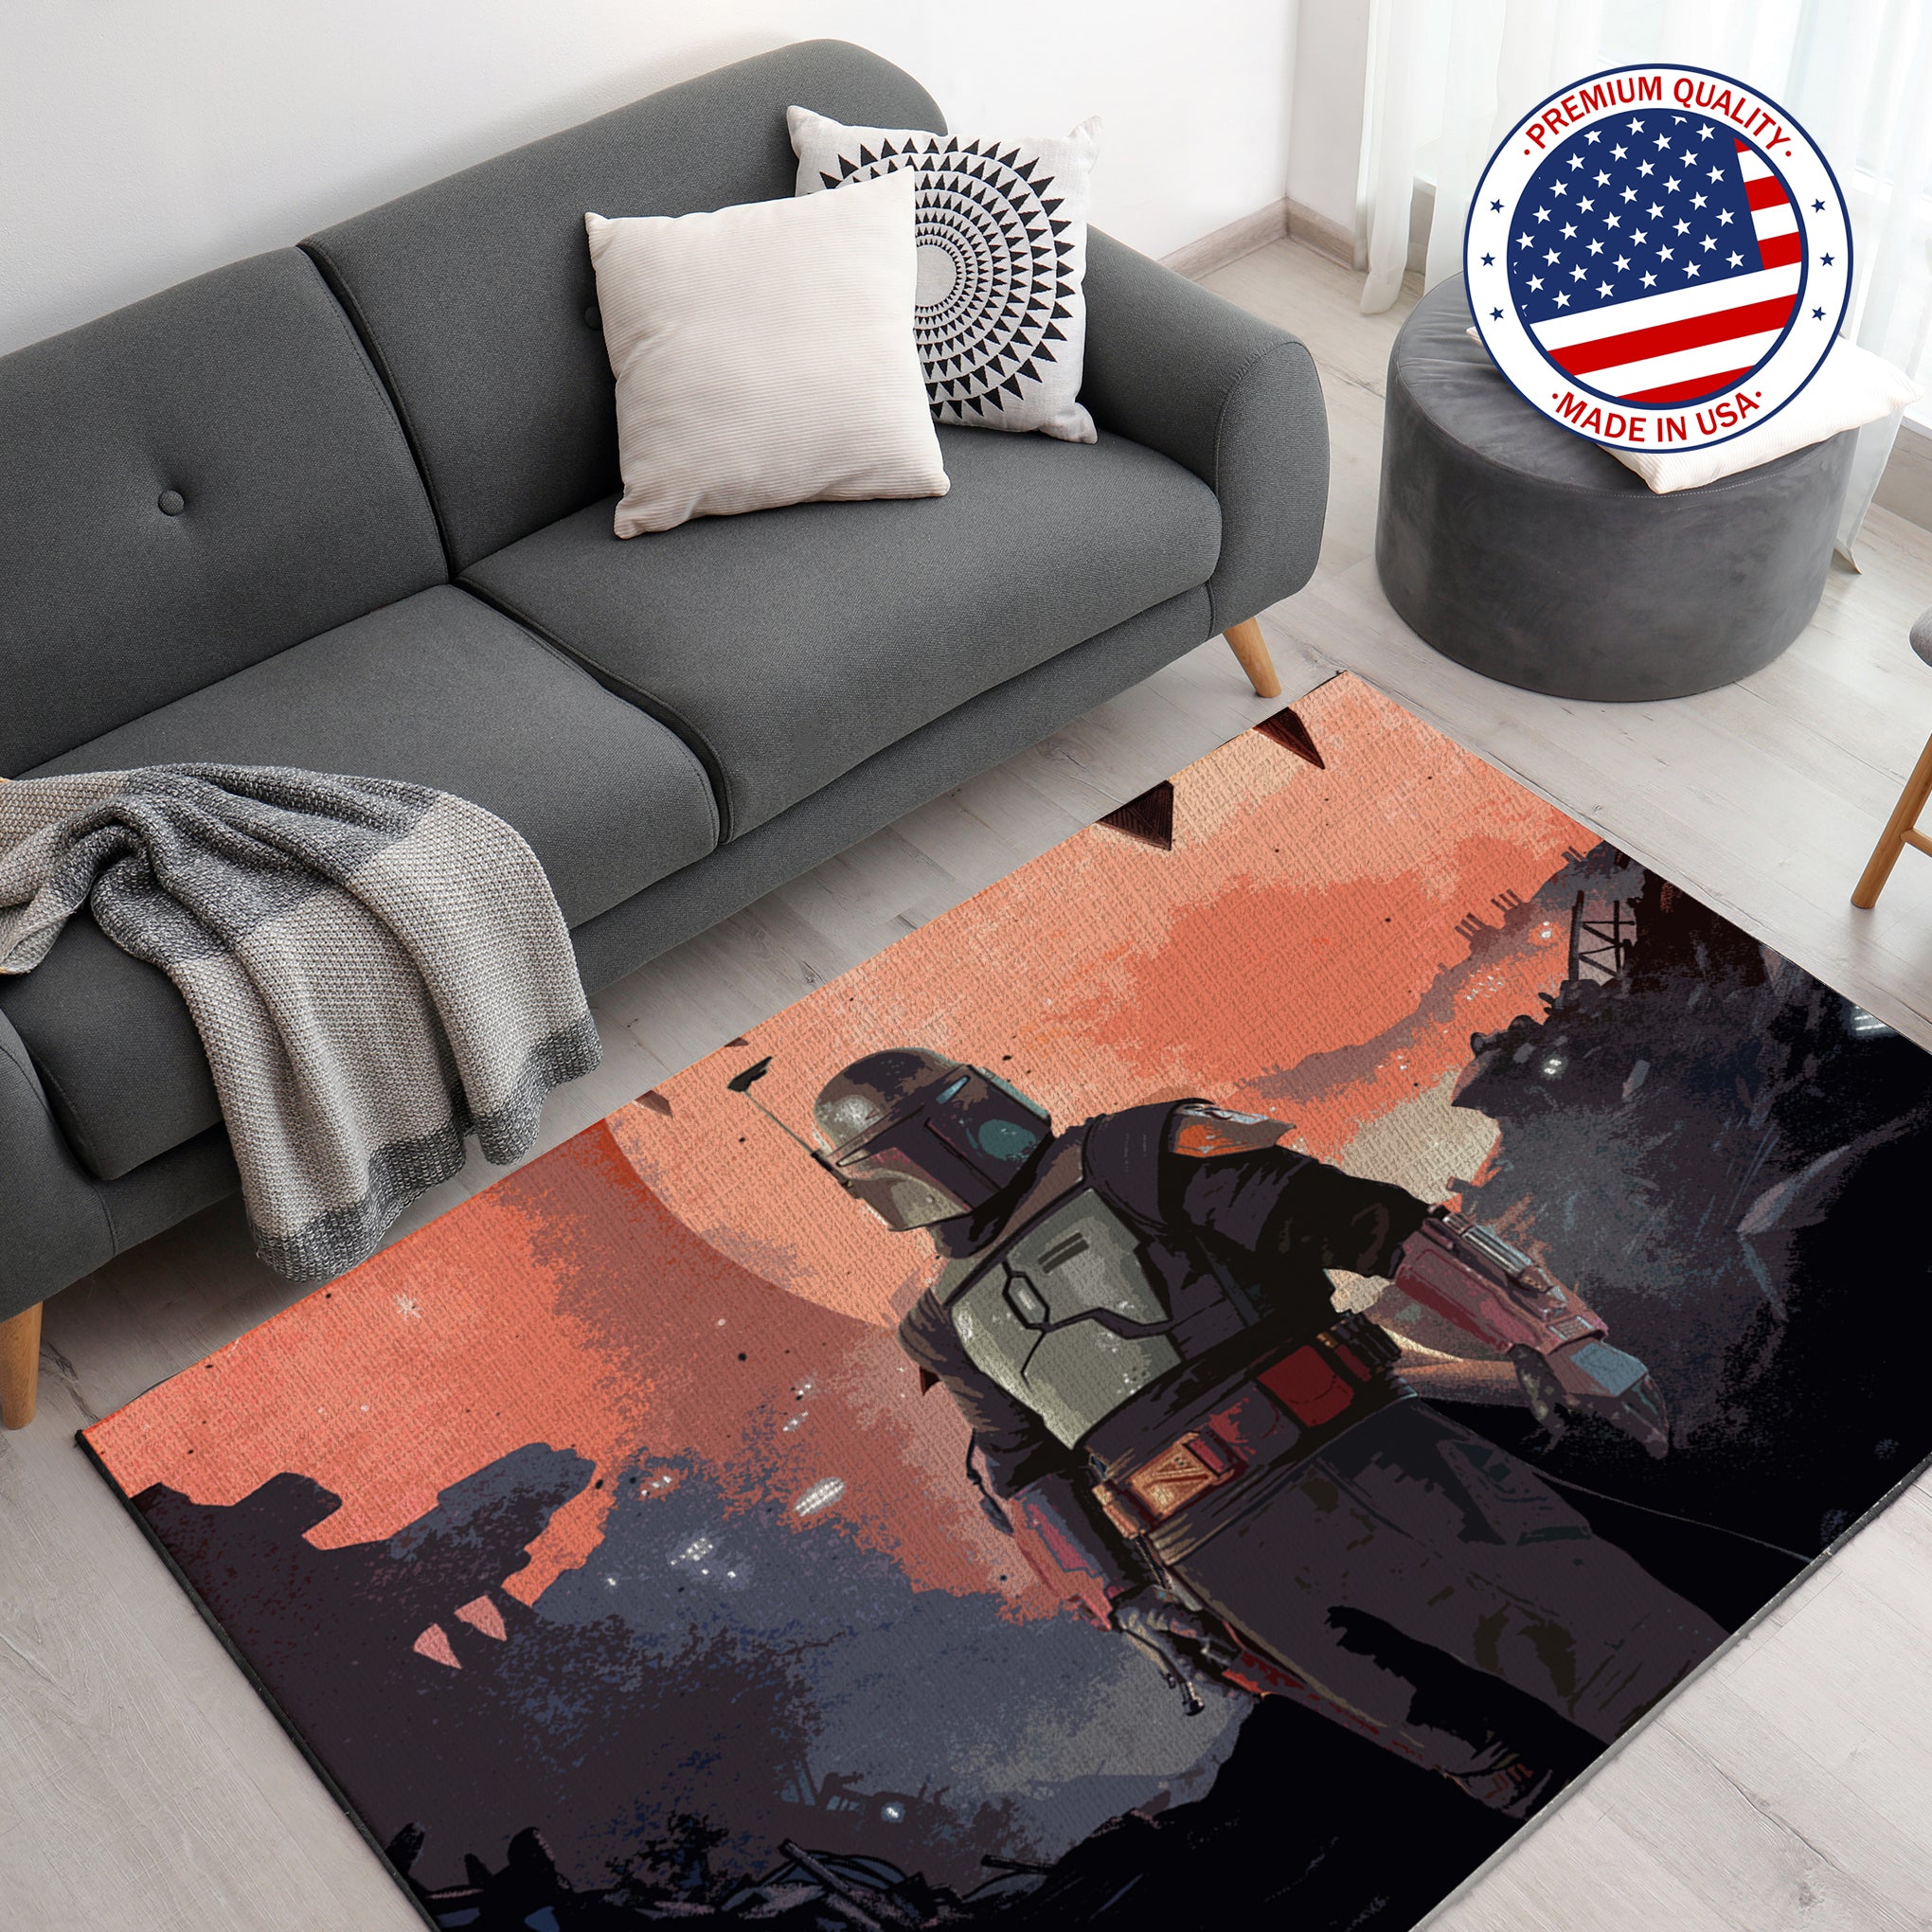 Boba Fett - End of new beginning inspired Gaming Rug - 62x40 inches